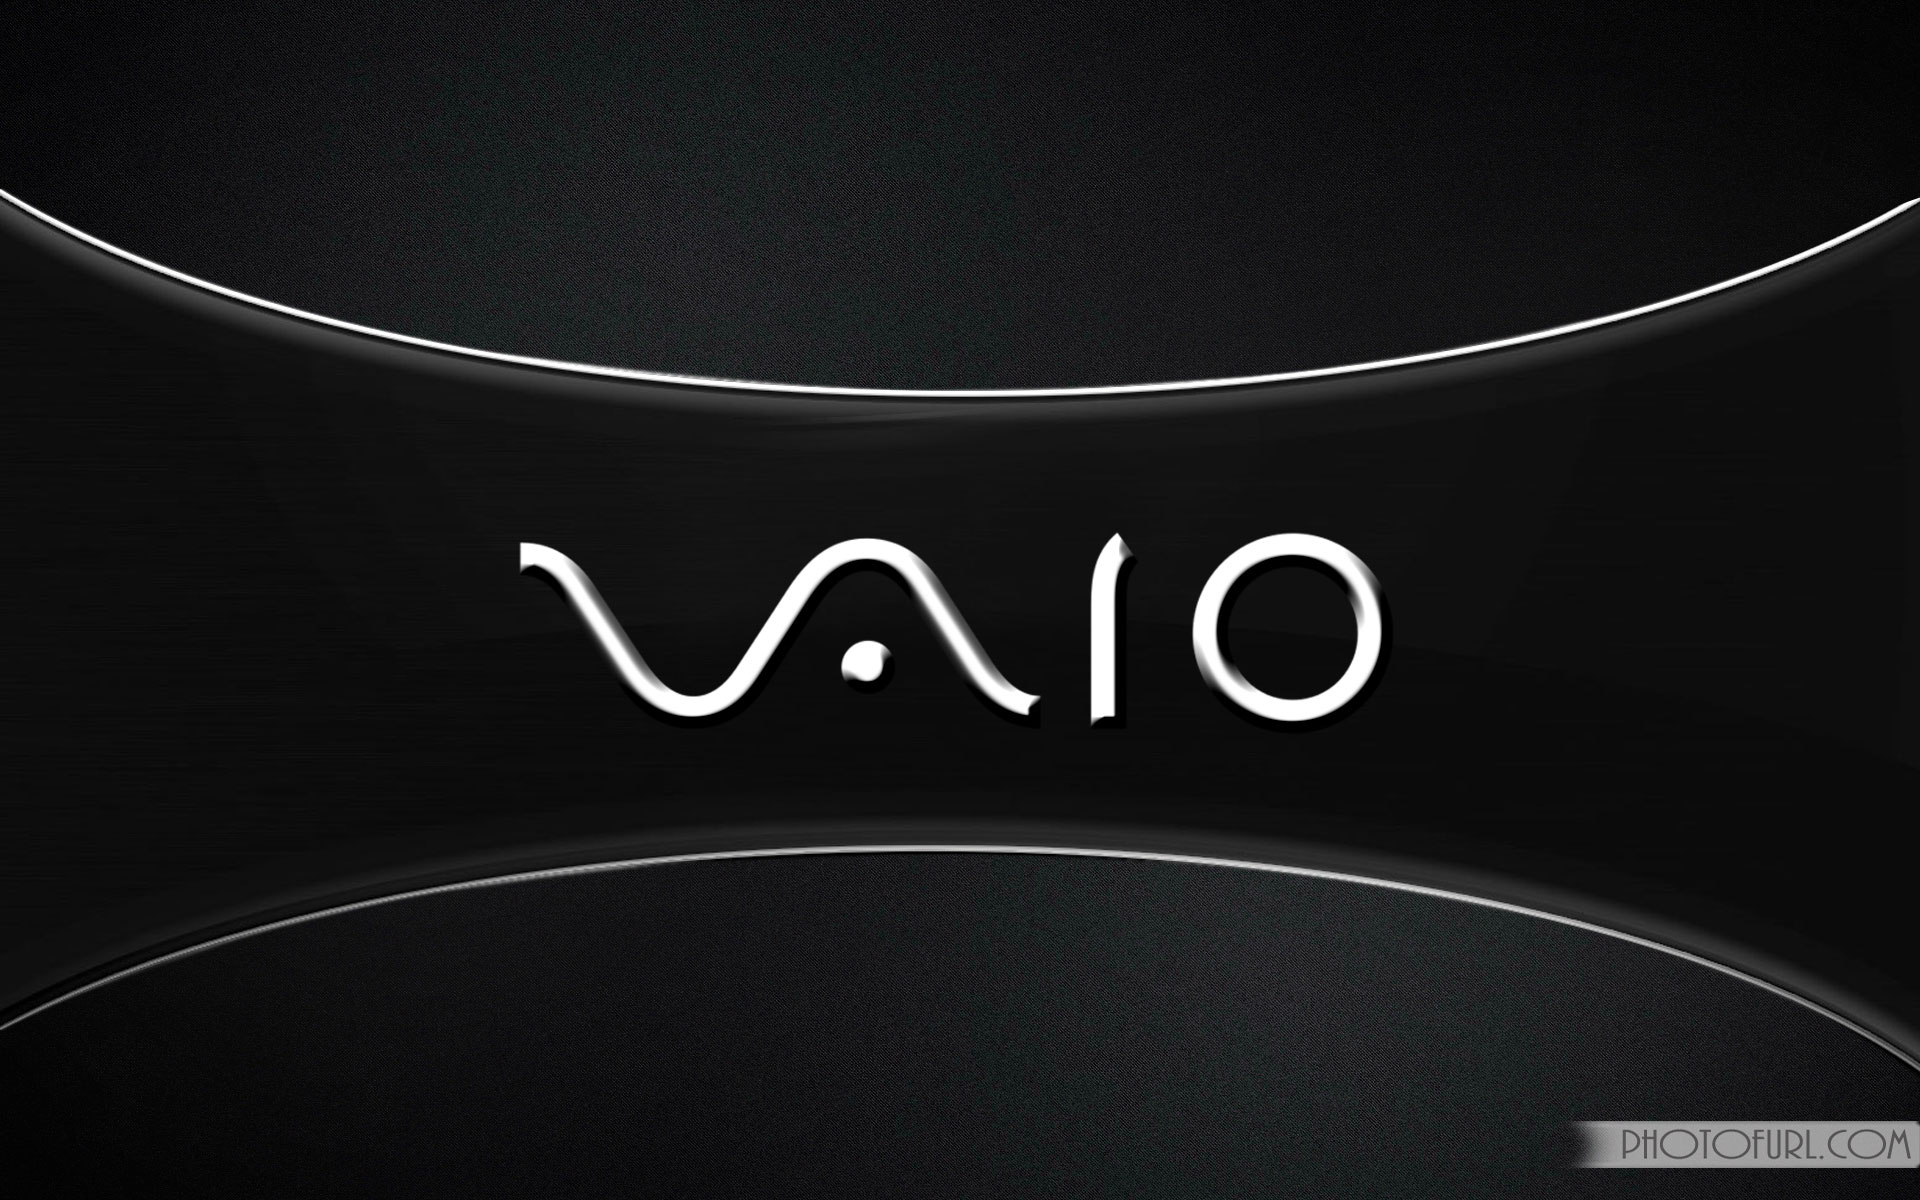 Related To Sony Vaio High Resolution Desktop Wallpaper Car